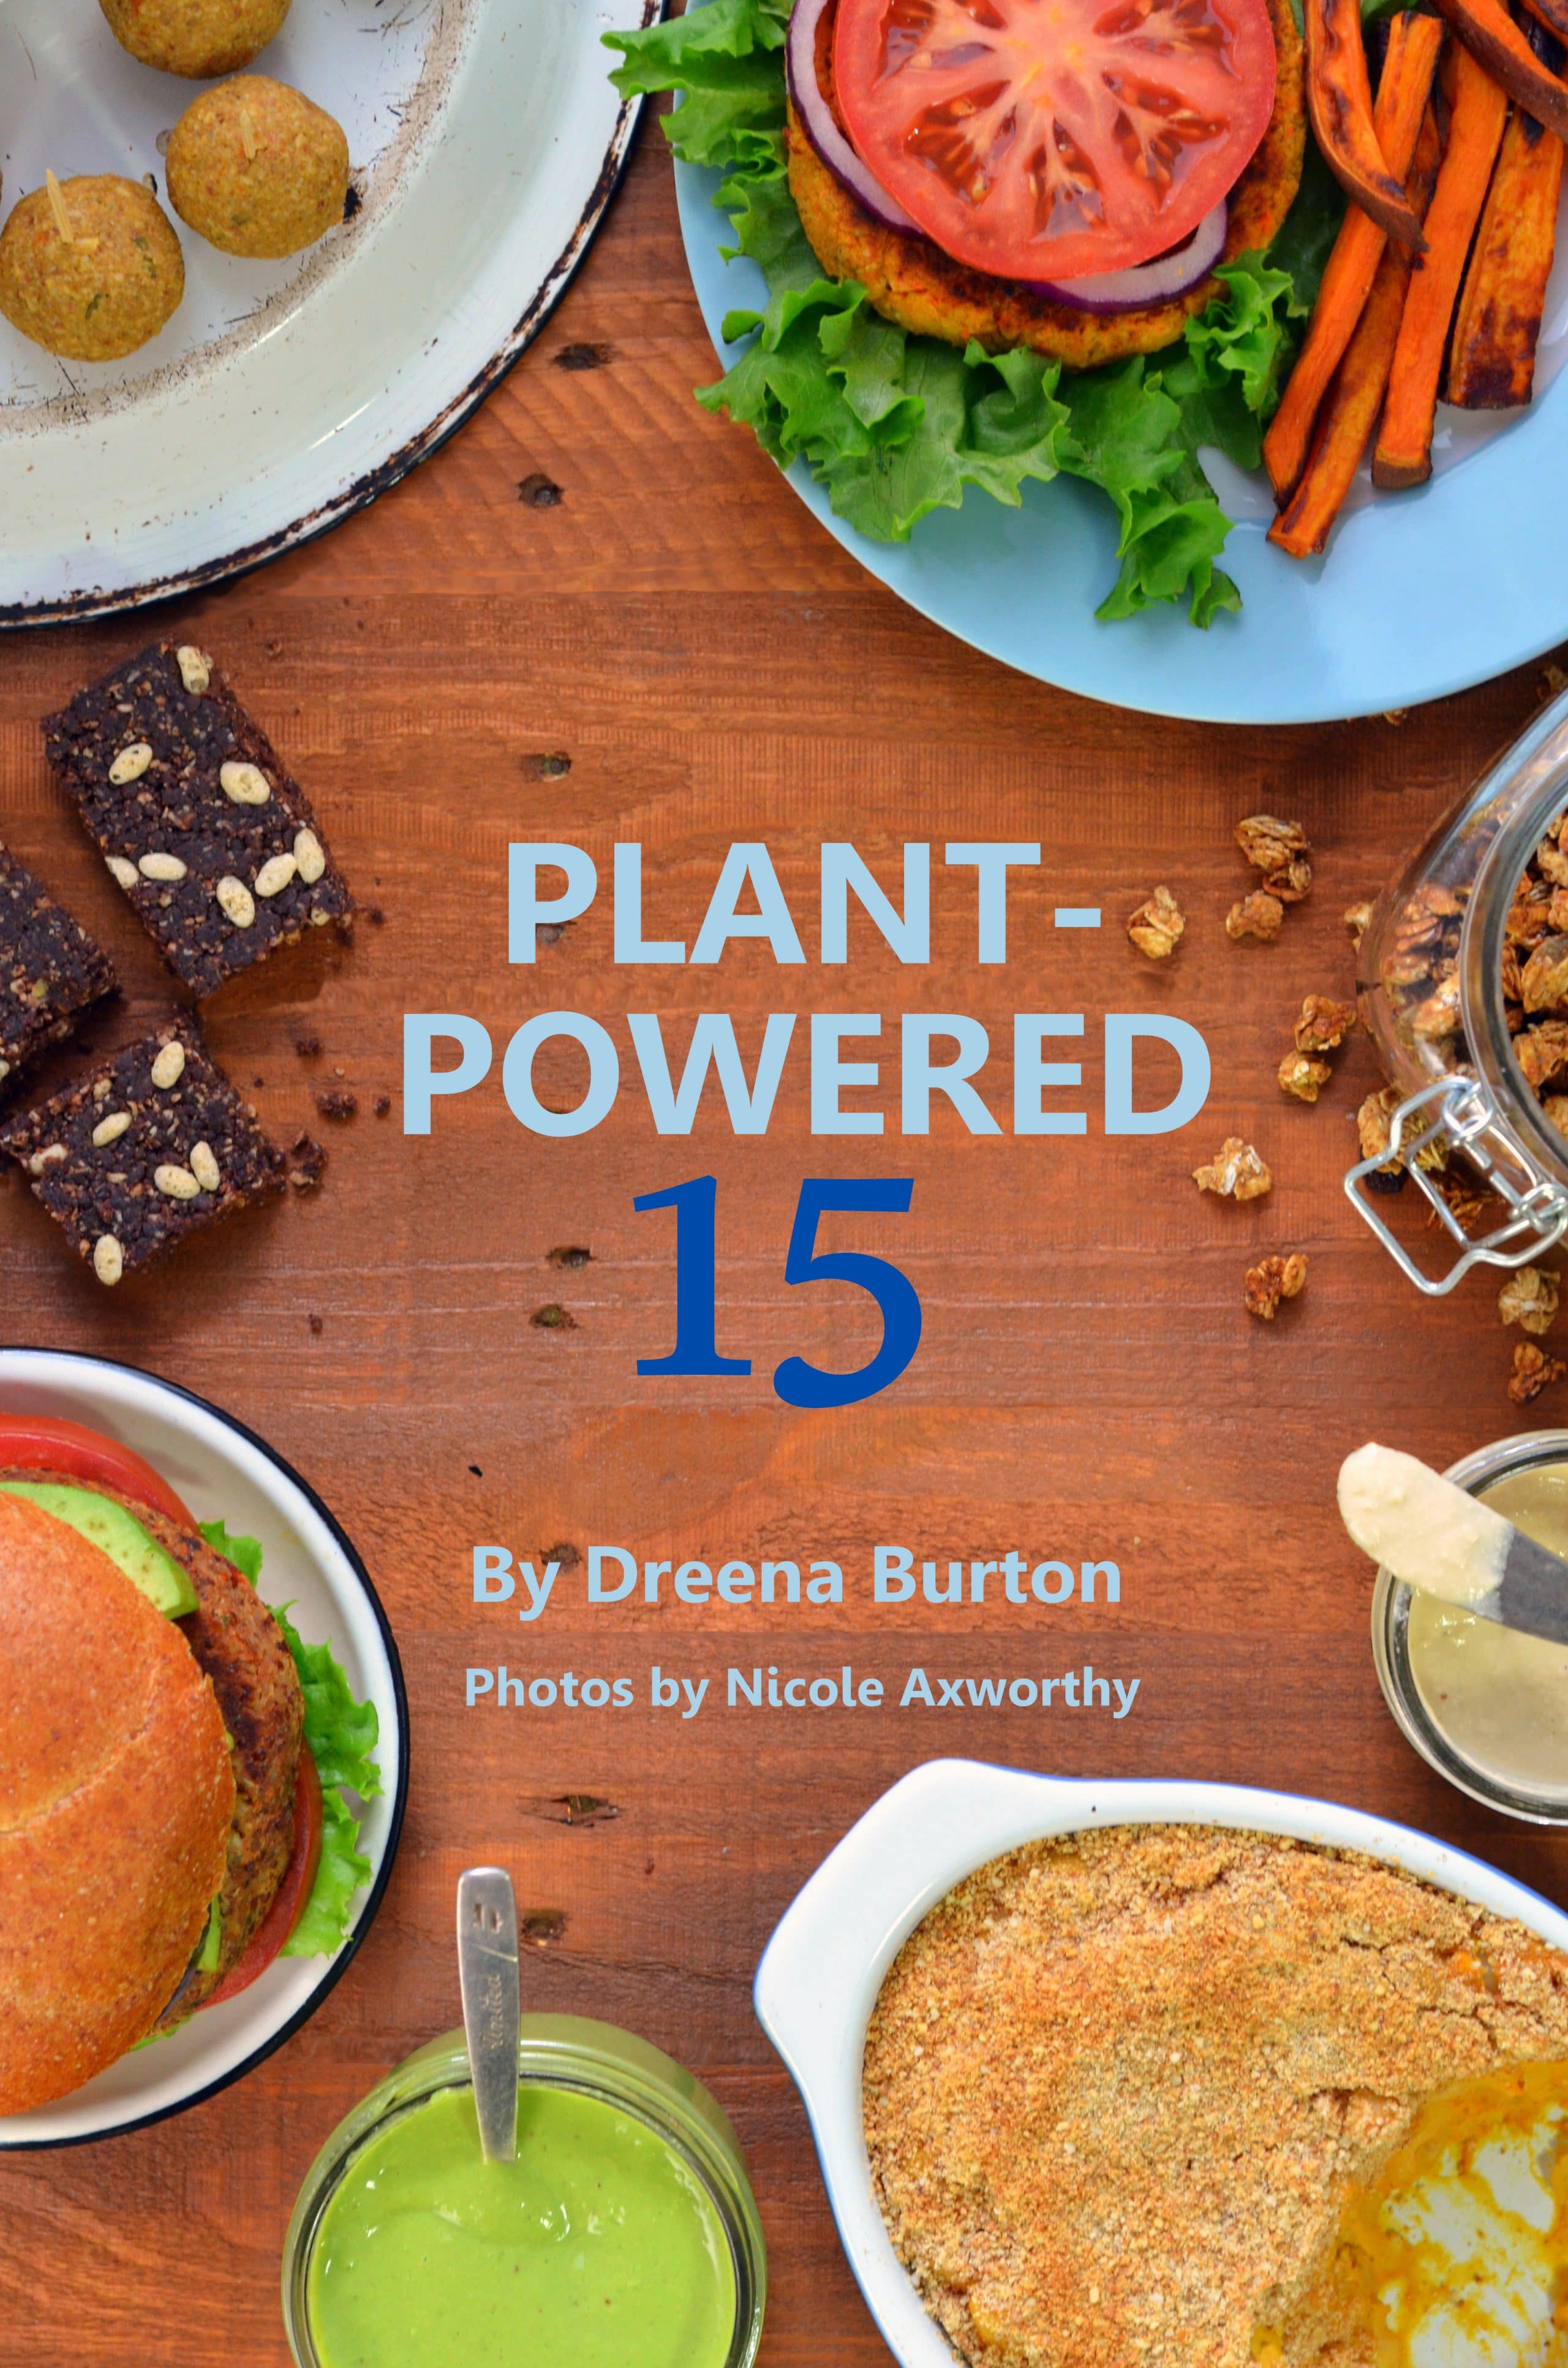 Plant-Powered 15 ebook by Dreena Burton - 1 year giveaway and offer!